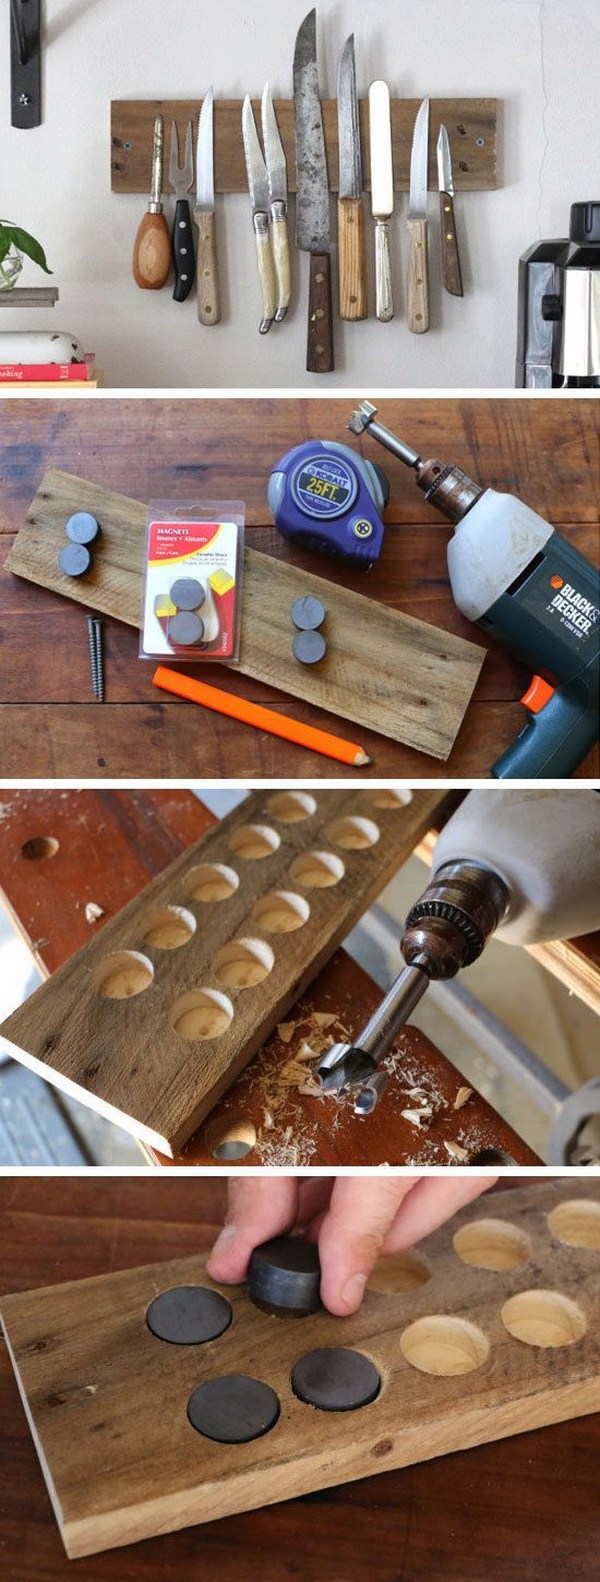 DIY Rustic Wall Rack: This exposed magnetic knife rack is super useful for maximizing storage space and providing easy access to kitchen tools. 